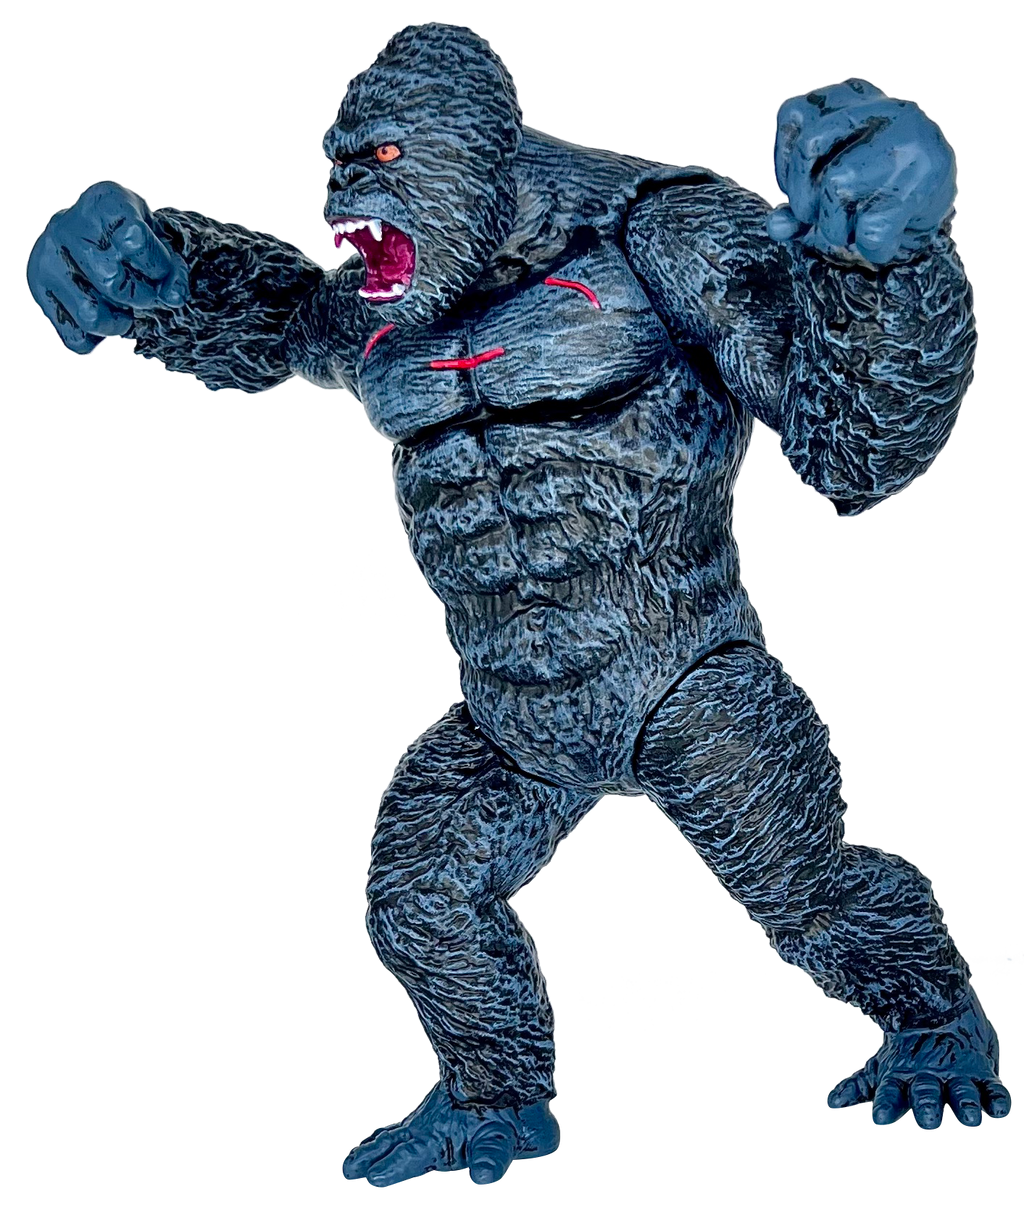 Buy Godzilla Toy - King of The Monsters Figure (2022) - Monster Series Toy  - Burning Godzilla - Godzilla Movie Action Figure - Godzilla Toy Size 12''  Head-to-Tail - Godzilla Collectible Toy Online at desertcartINDIA